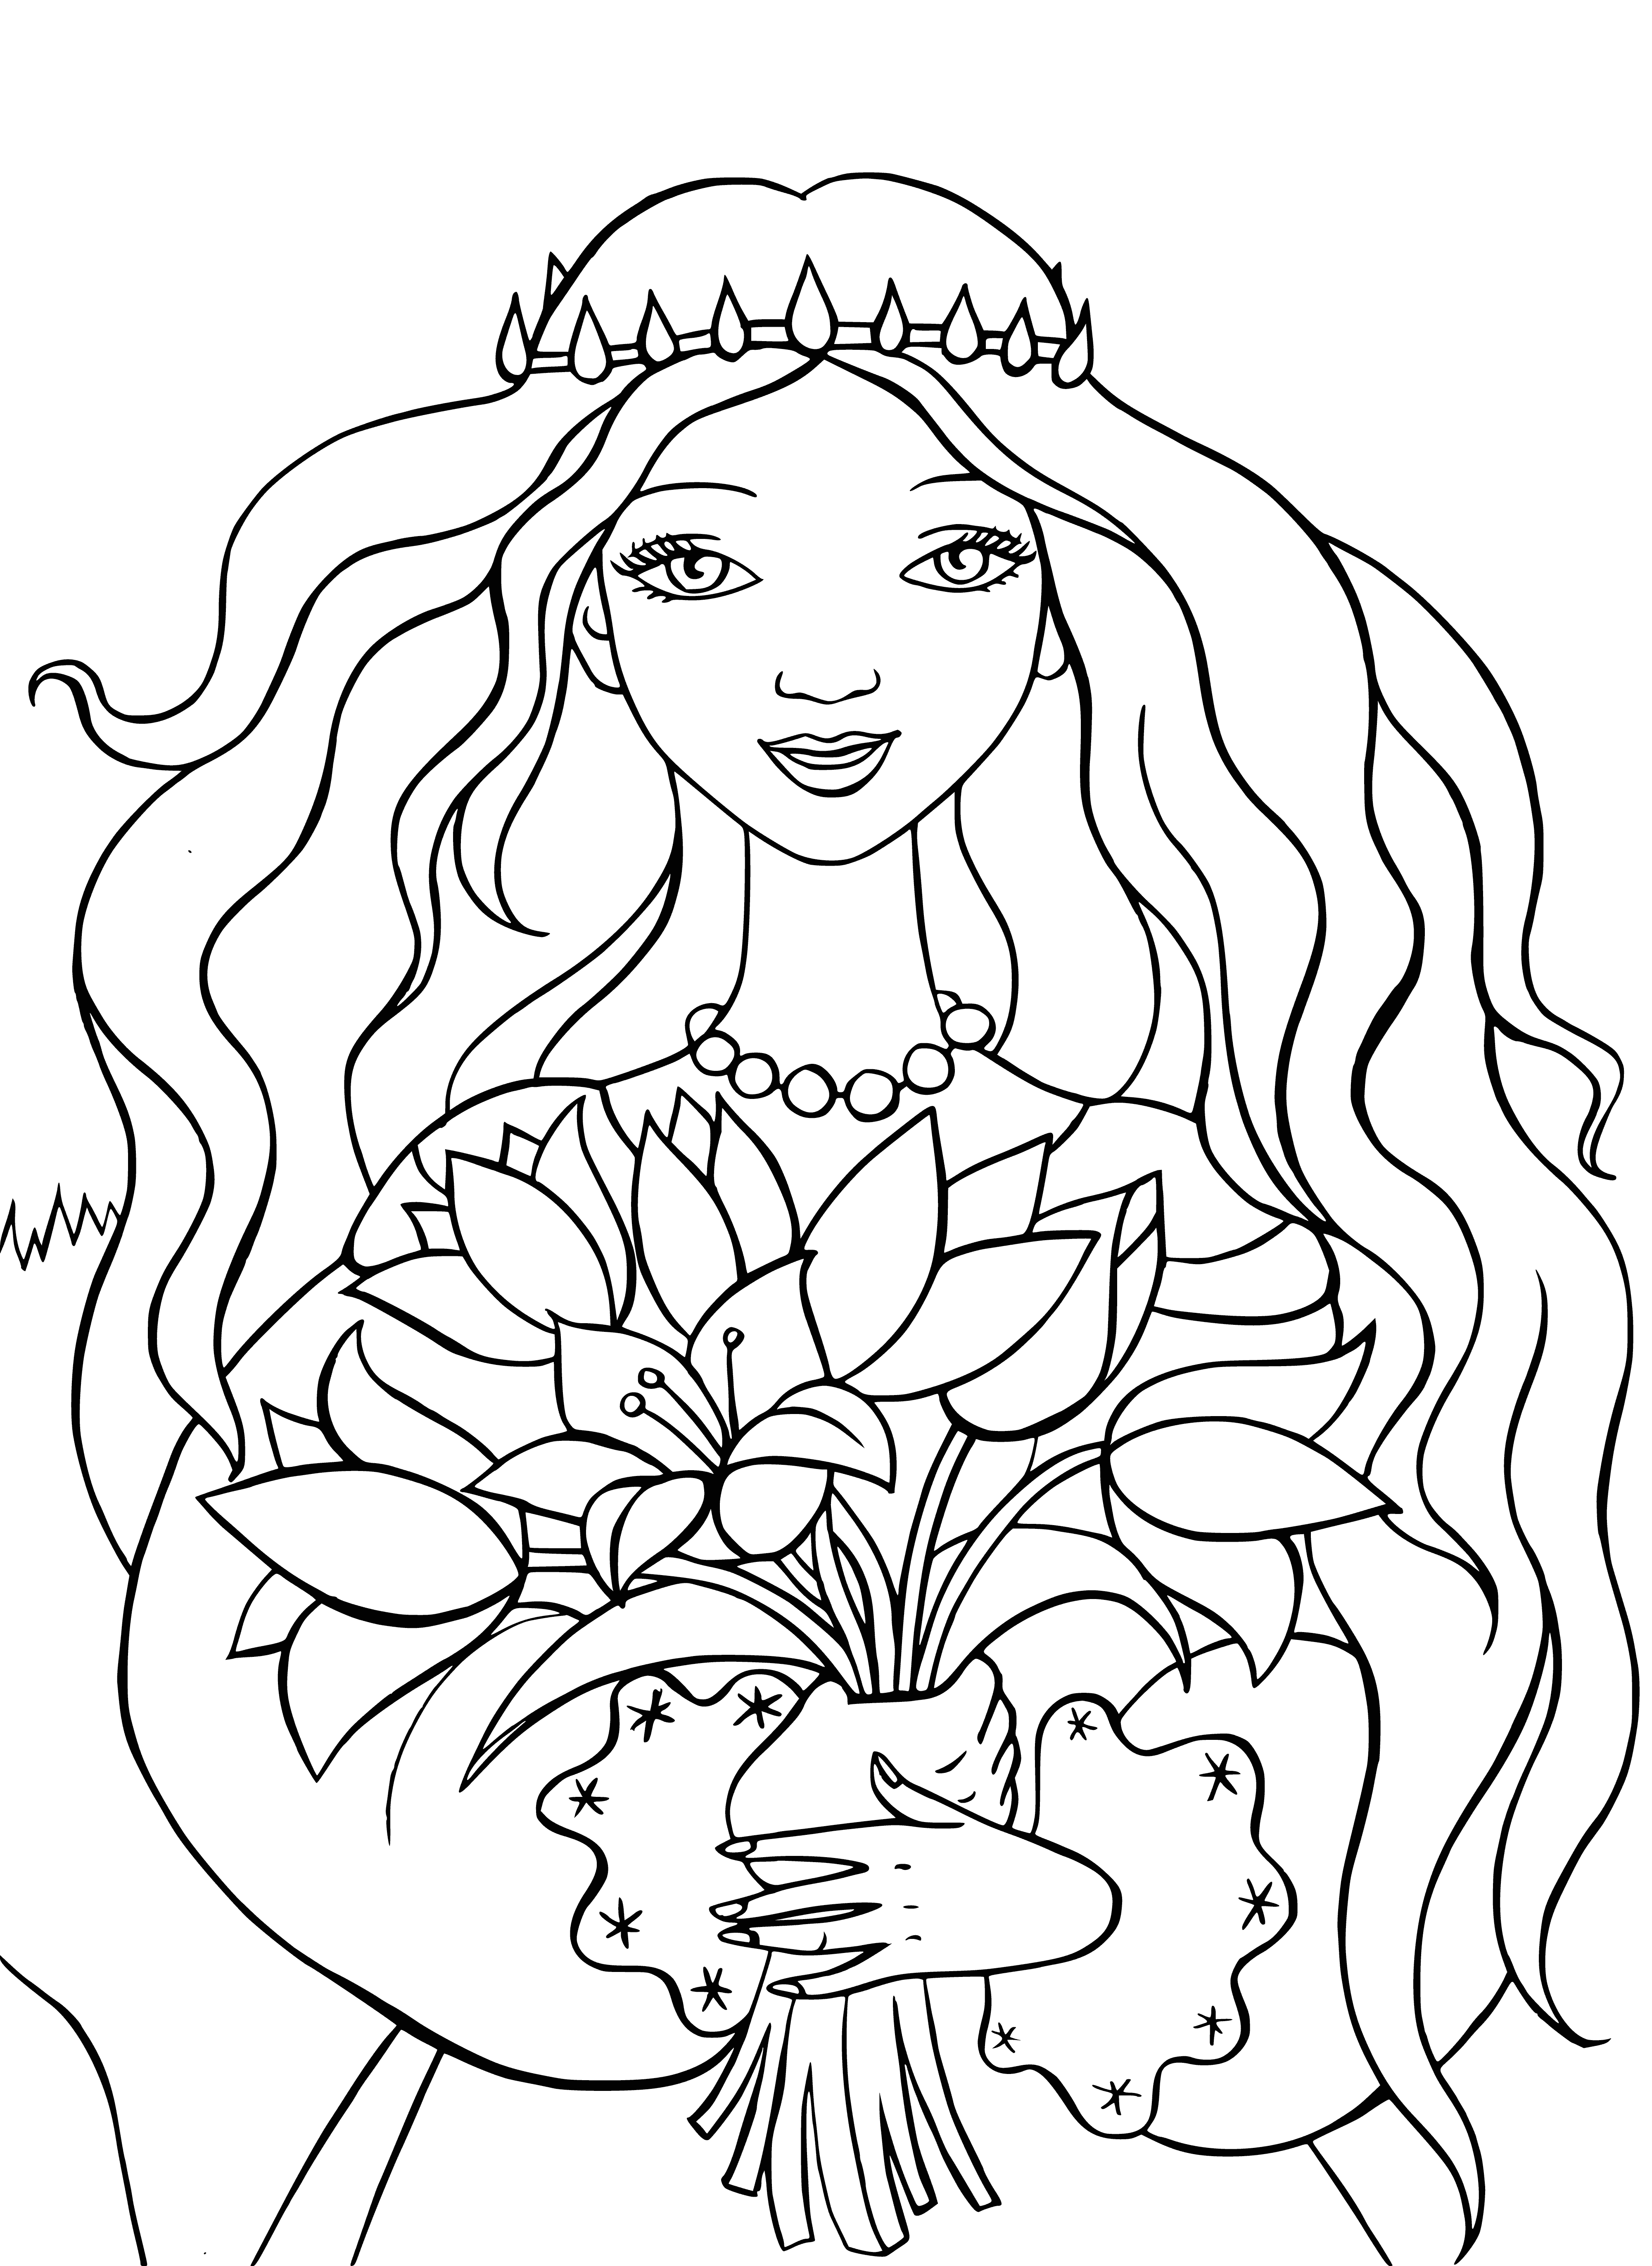 coloring page: Girl in pink dress by castle, picking flowers. Drawbridge down, surrounded by trees and blooms. #magicalmoments #dreamland